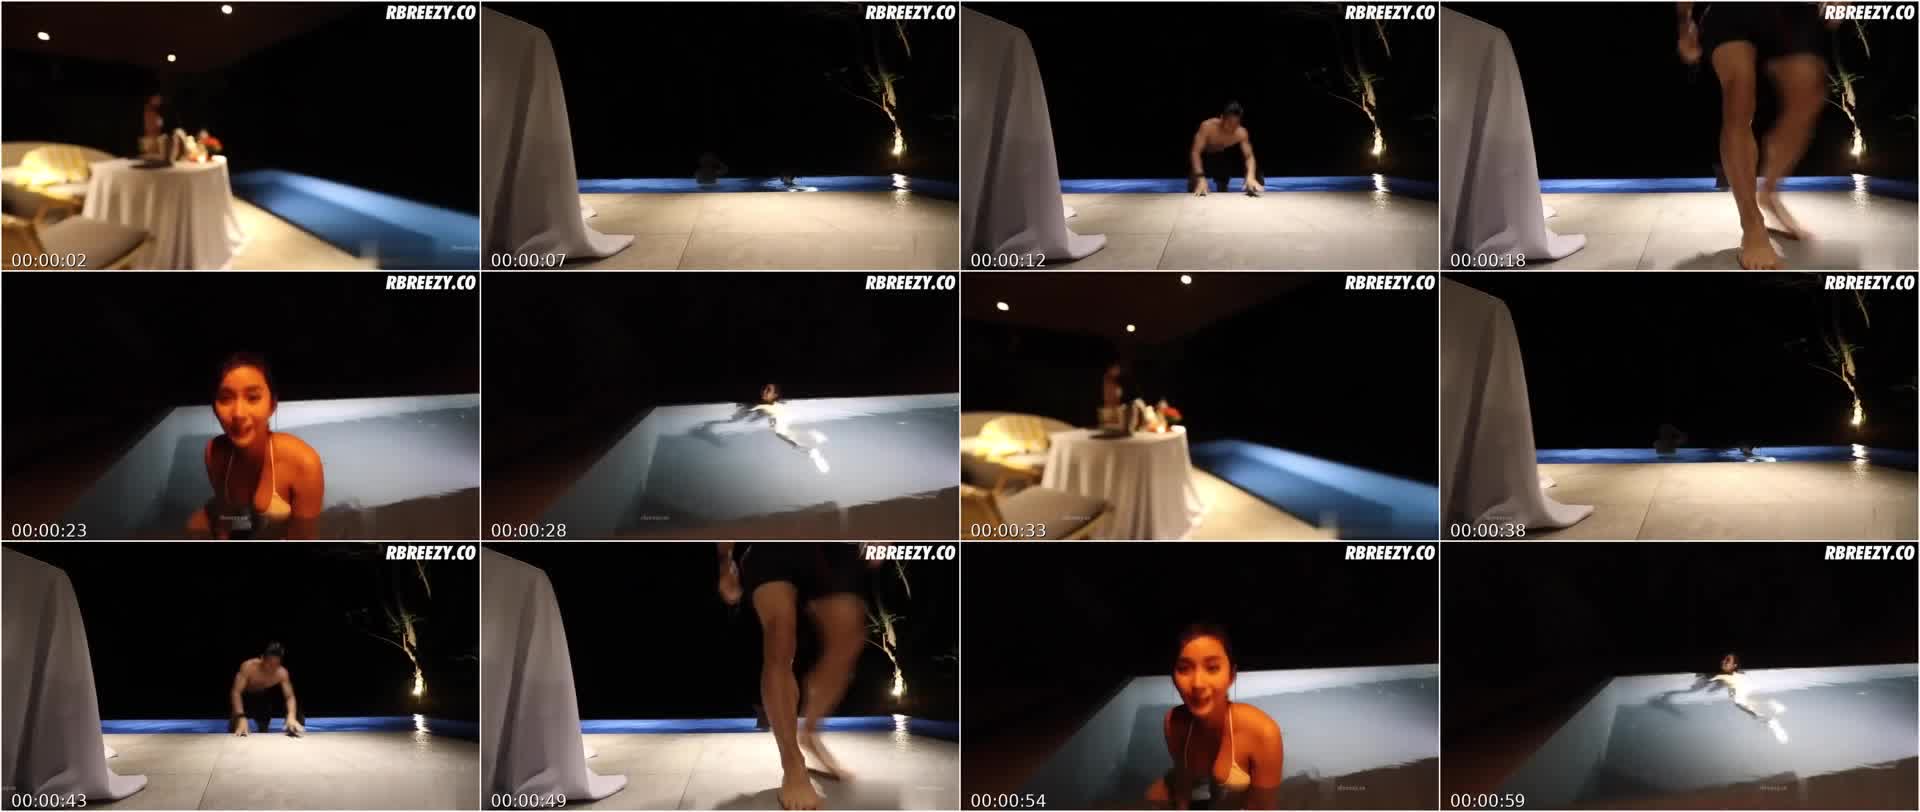 Alodia and will intimate private pool